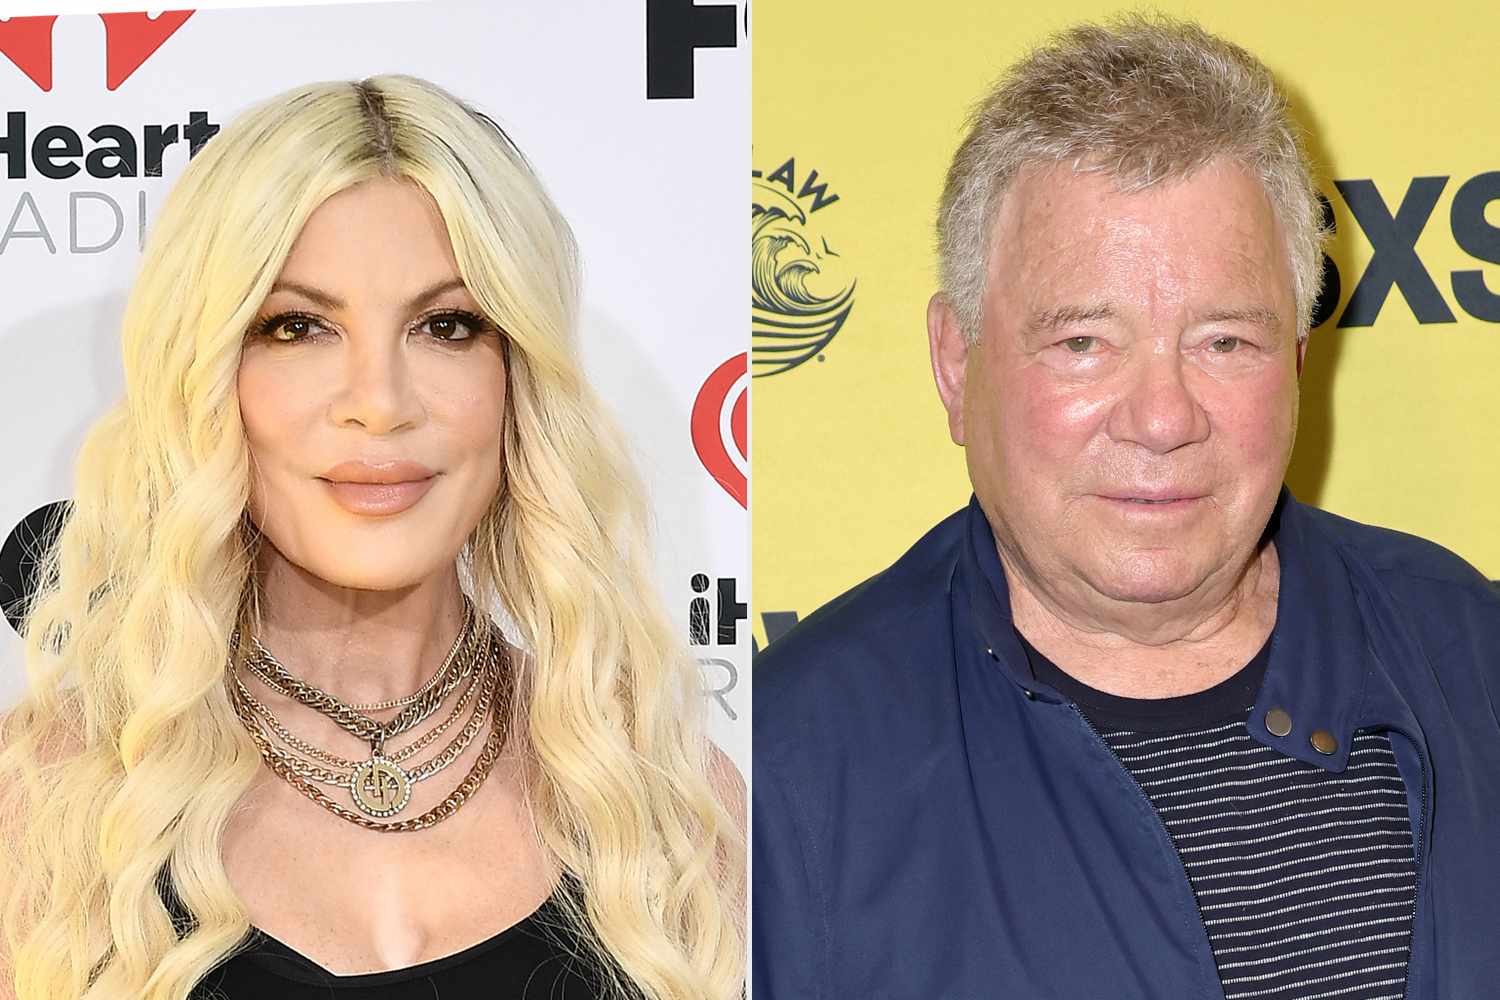 Tori Spelling and William Shatner have a seriously detailed sex talk